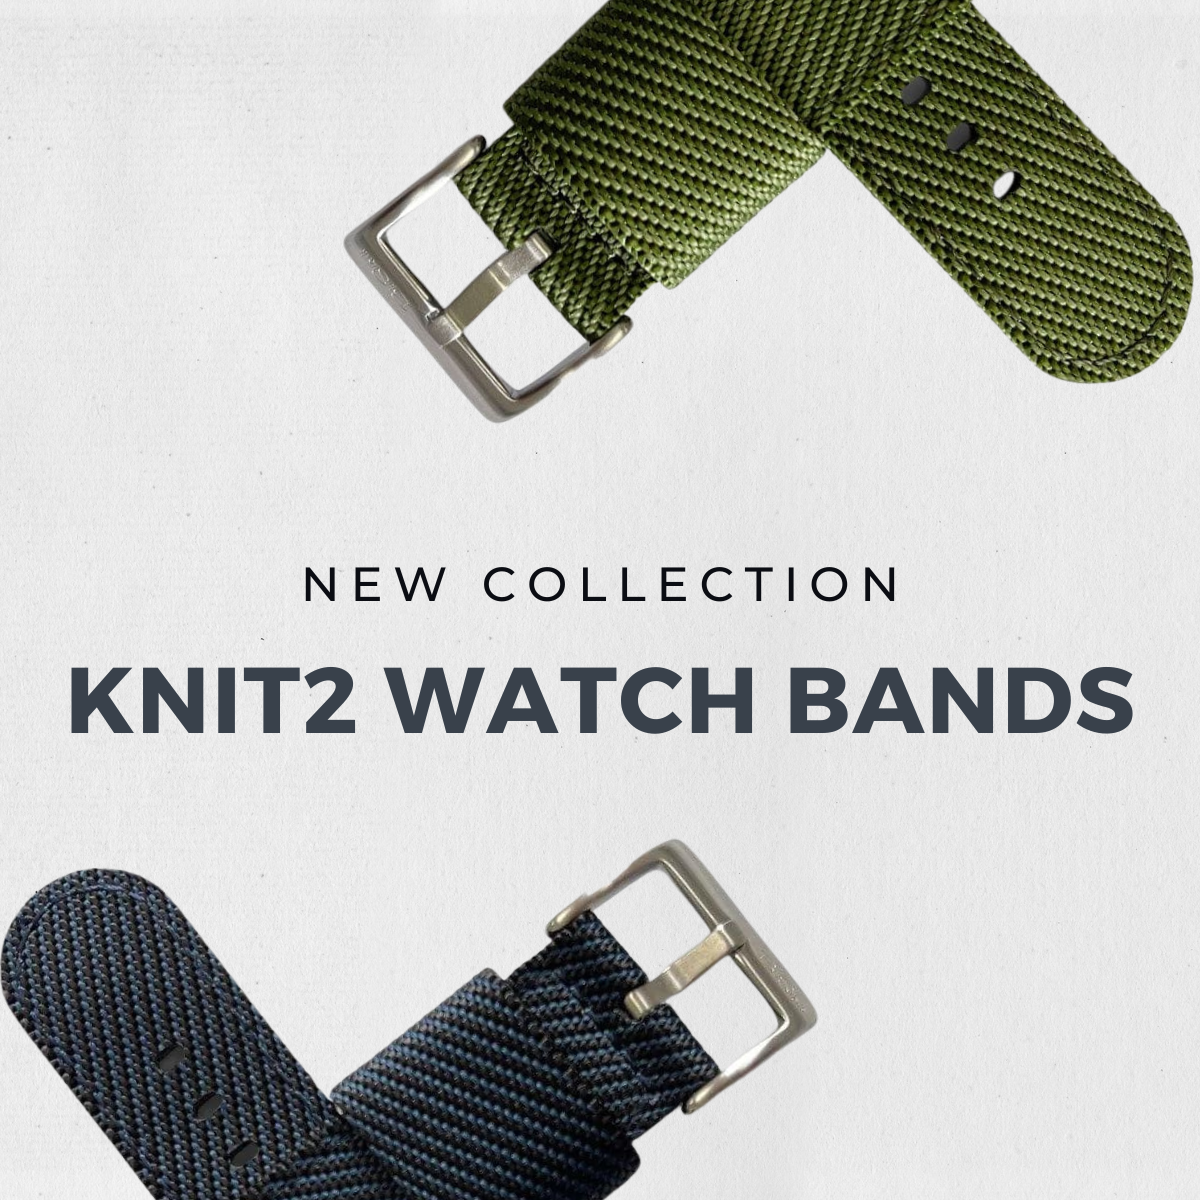 Knit2 Watch Bands